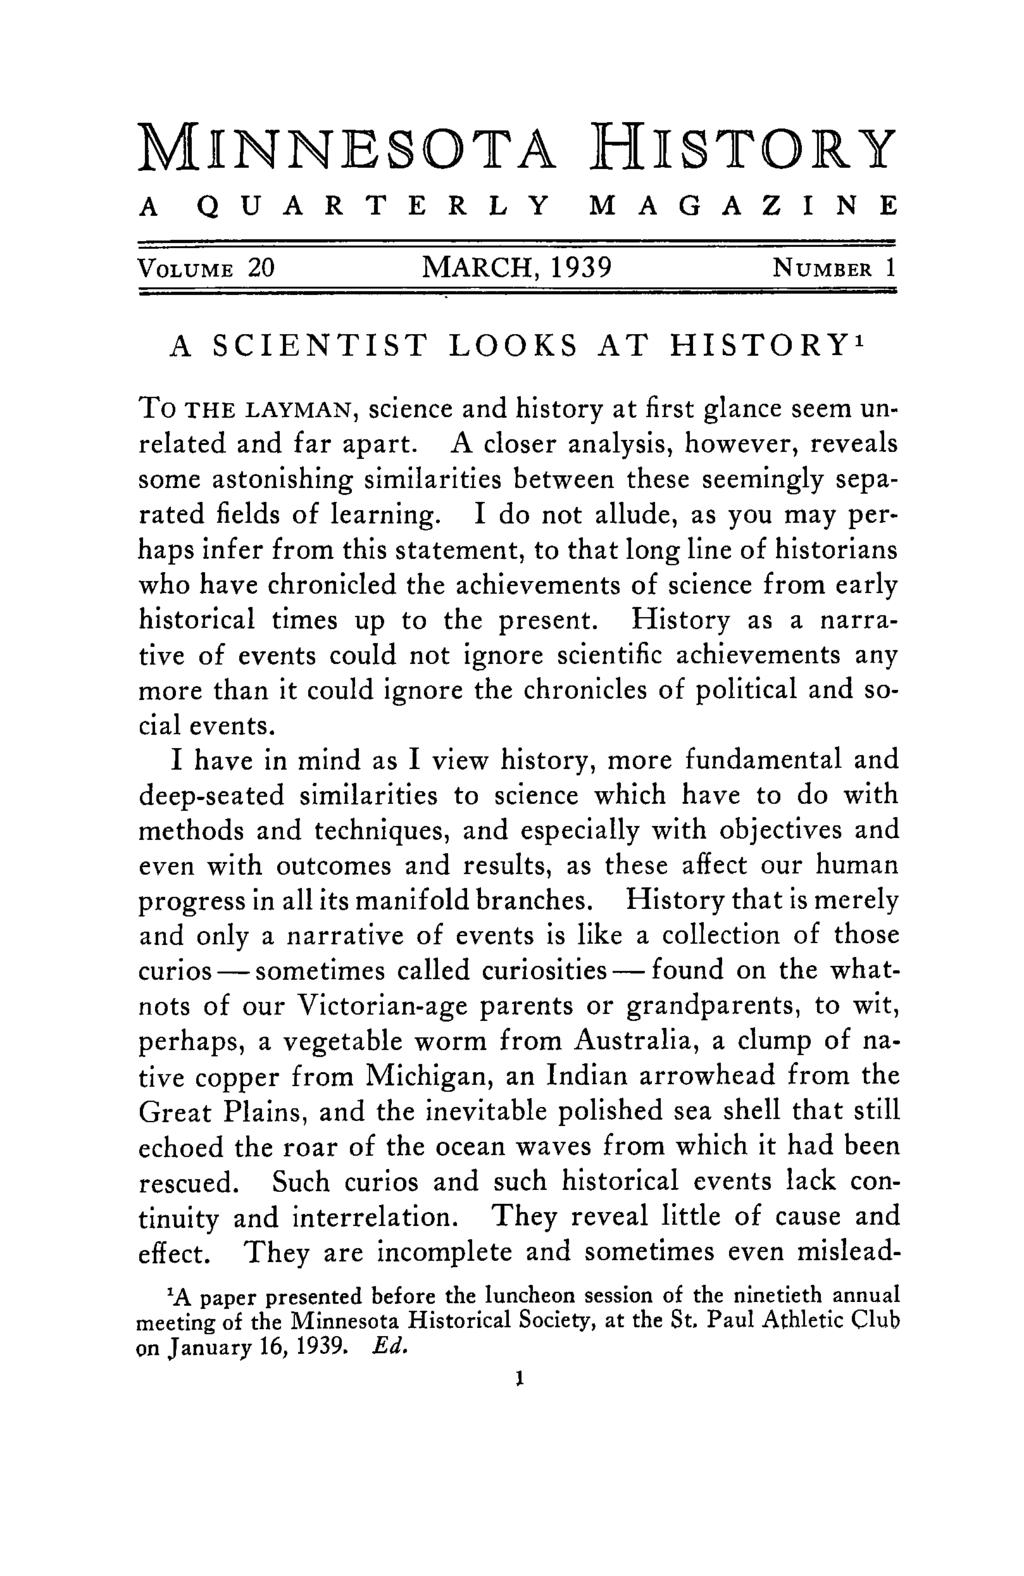 MINNESOTA HISTORY A Q U A R T E R L Y M A G A Z I N E VOLUME 20 MARCH, 1939 NUMBER 1 A SCIENTIST LOOKS AT HISTORY^ To THE LAYMAN, science and history at first glance seem unrelated and far apart.